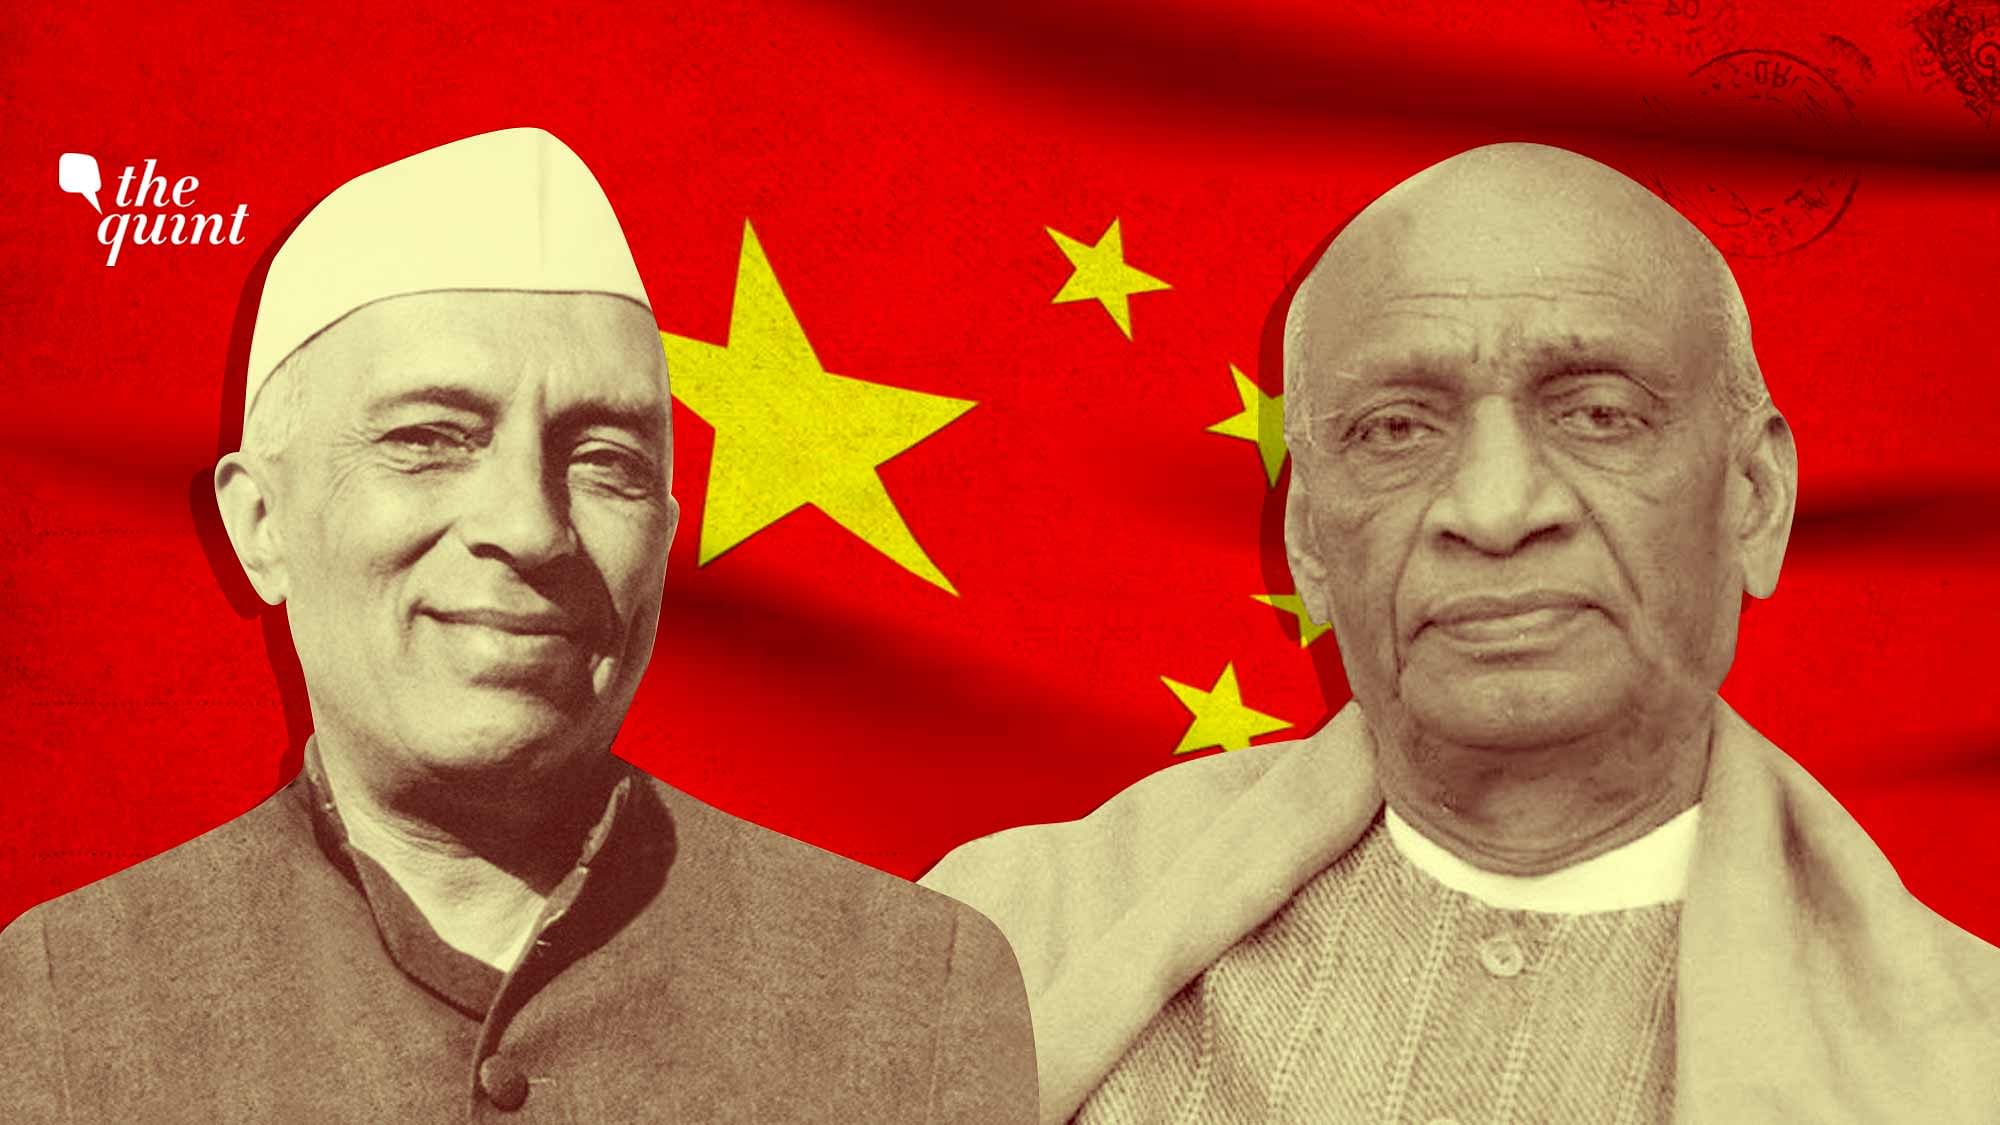 Sardar Patel wrote to PM Jawaharlal Nehru about his concerns with respect to the Tibet issue in 1950.